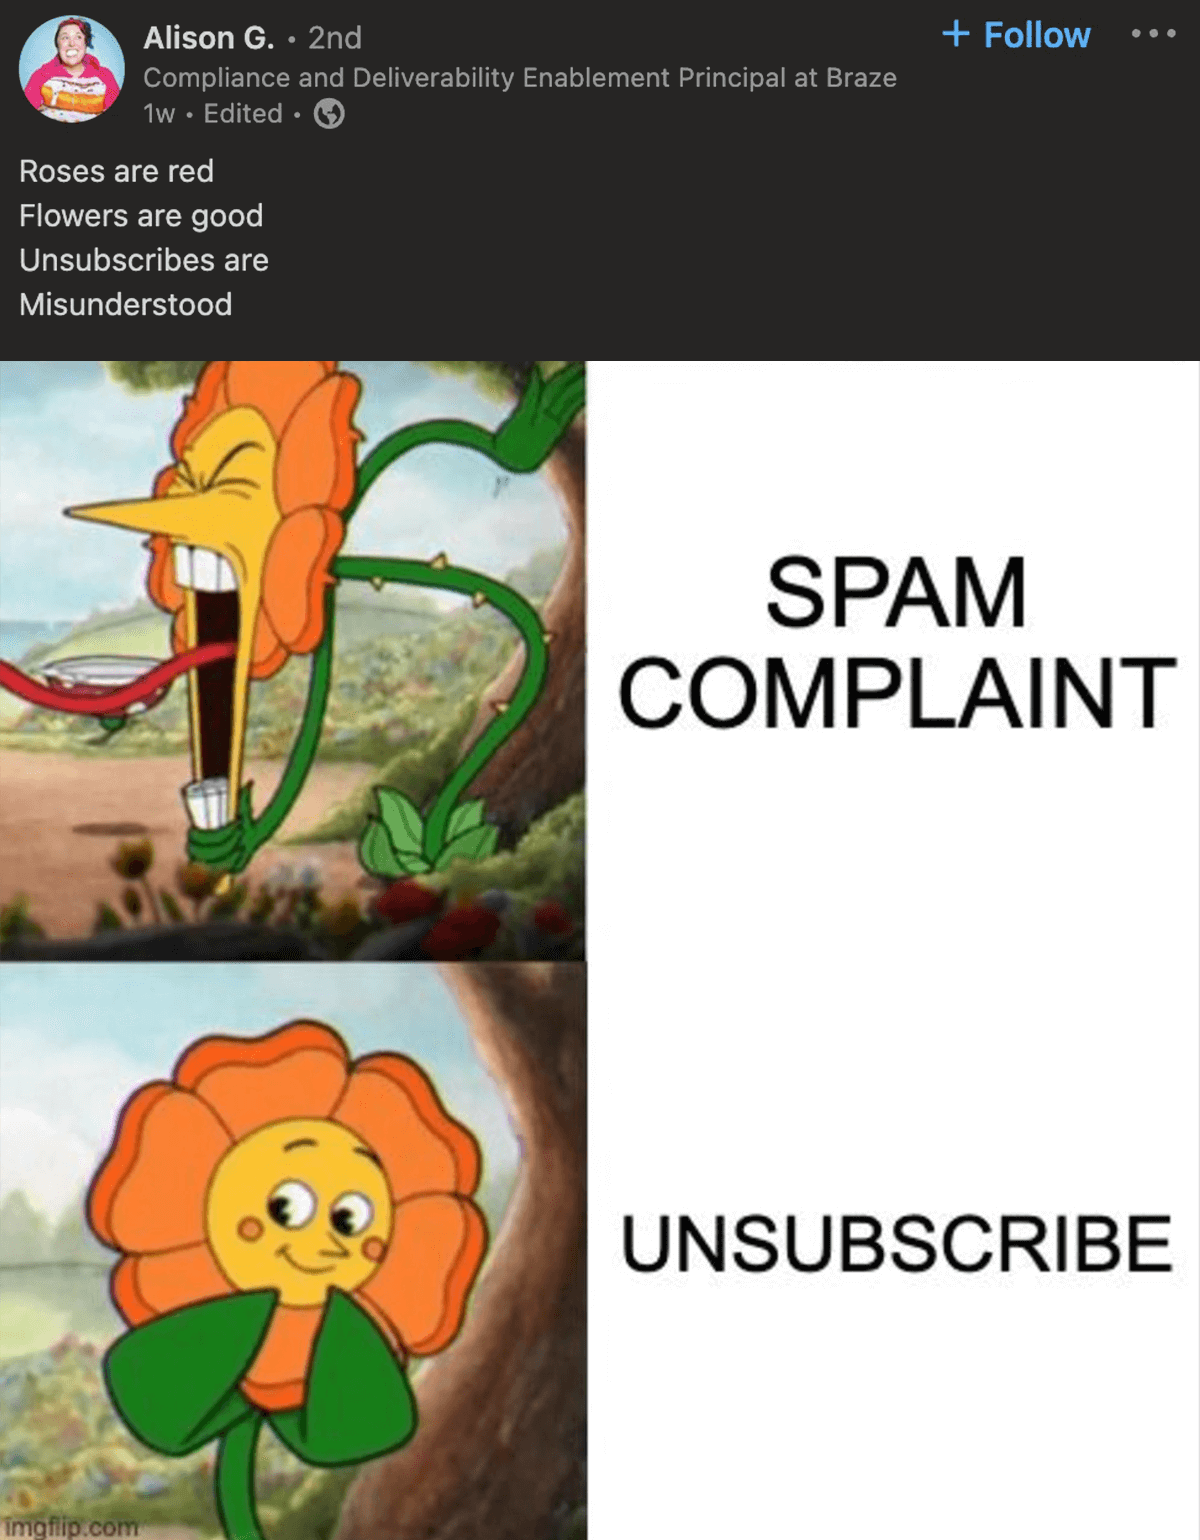 Alison G. on LinkedIn: Roses are red, flowers are good, unsubscribes are misunderstood. A meme with a flower yelling about a spam complaint and smiling about unsubscribes.